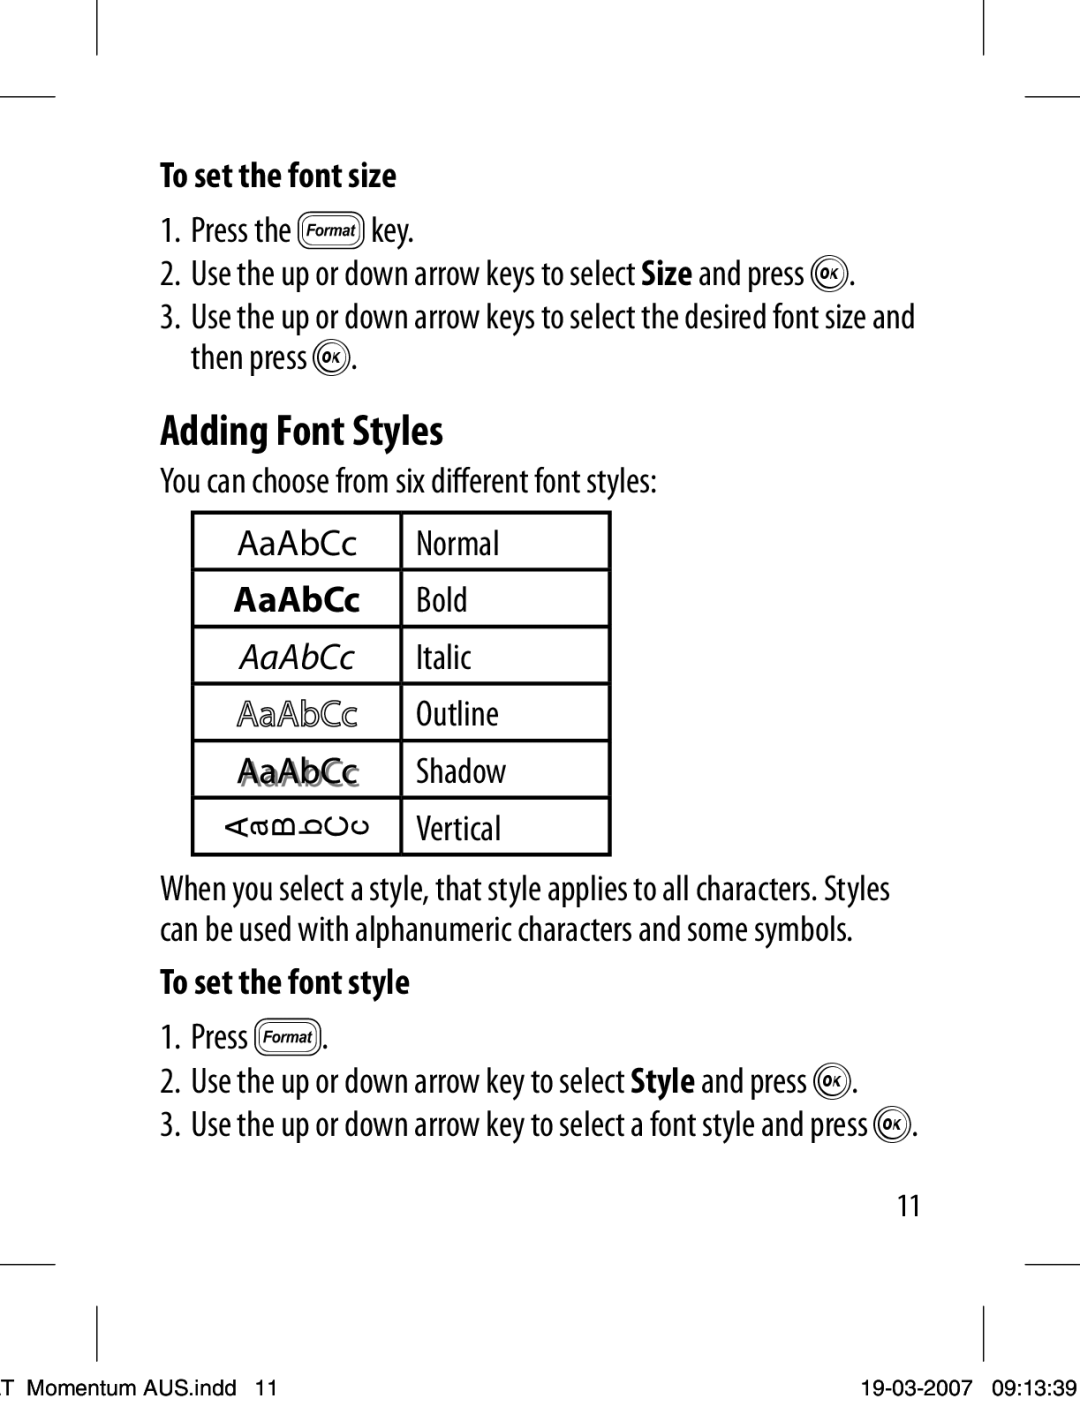 Dymo LT-100T manual Adding Font Styles, Press the ôkey, You can choose from six different font styles, AaAbCc, Bold, Italic 